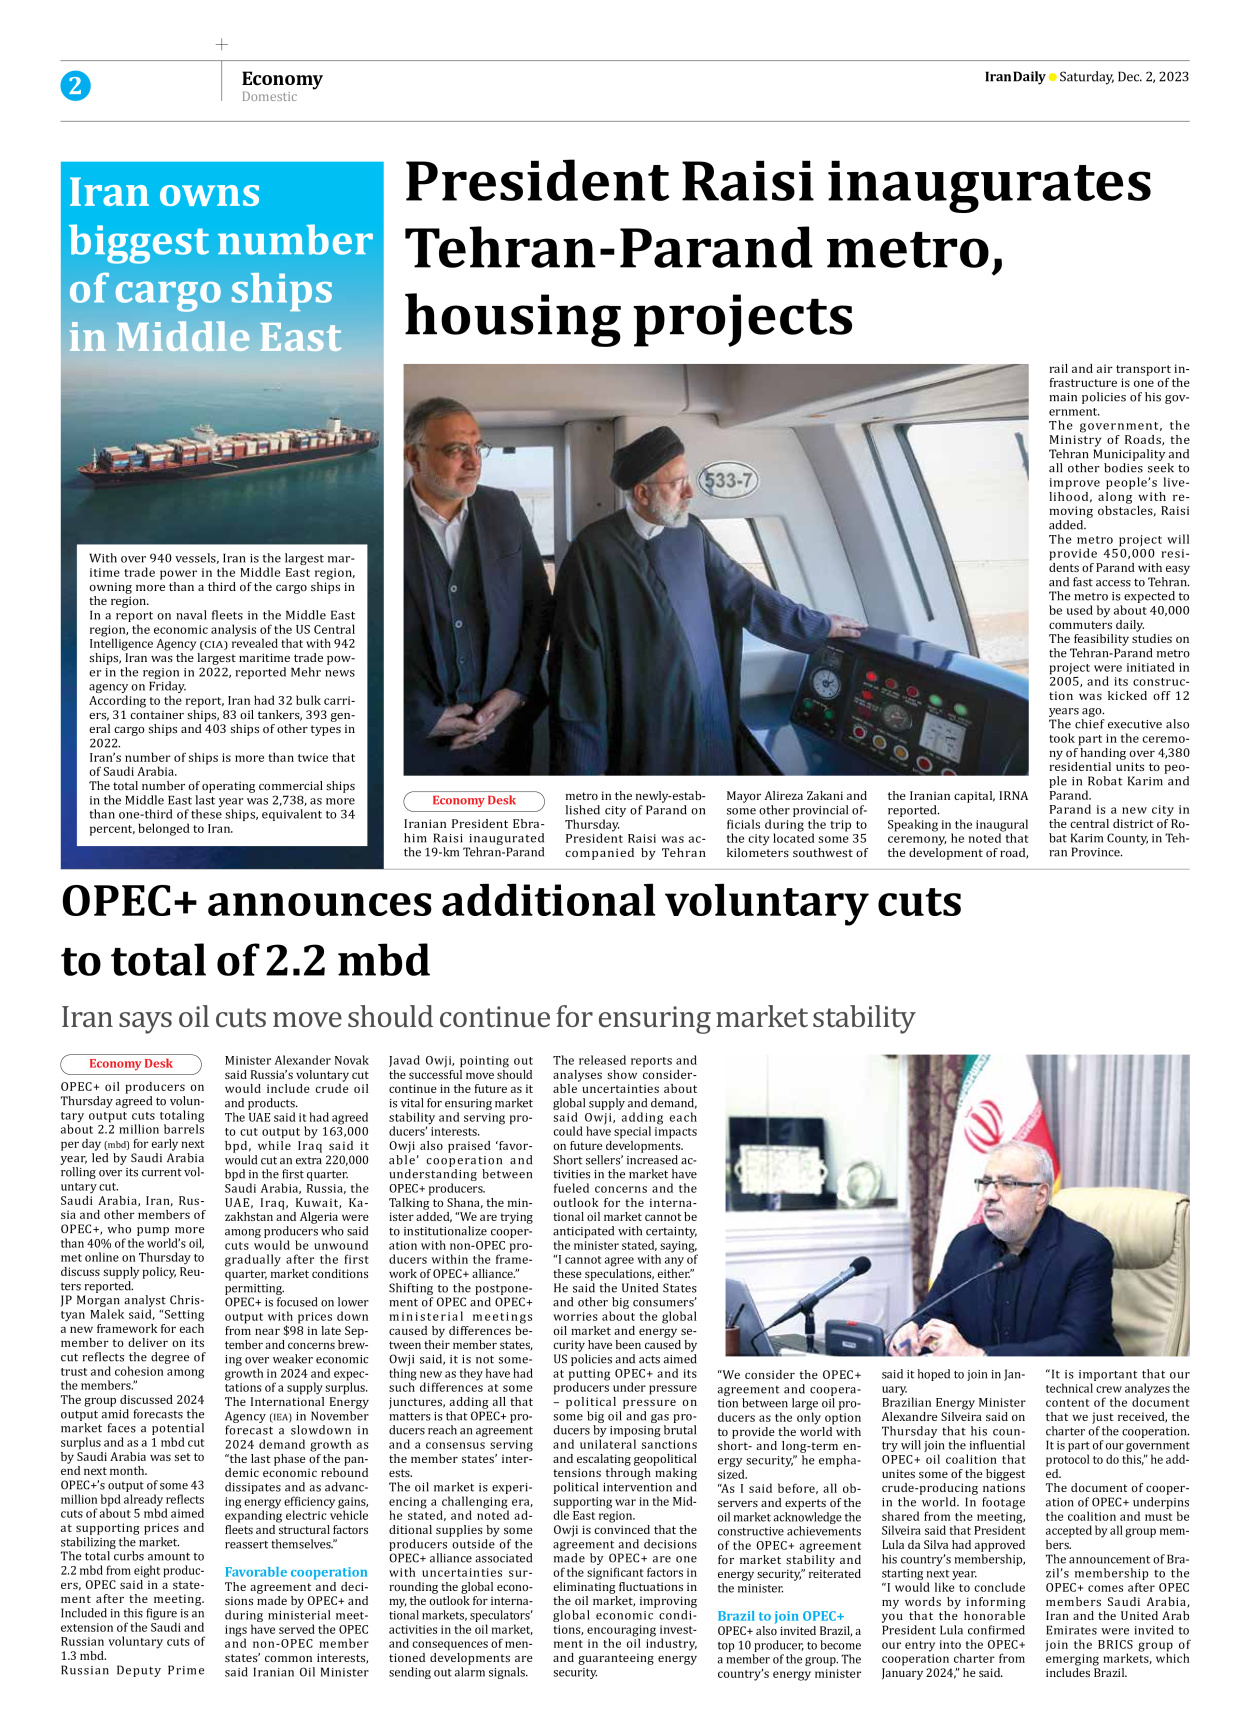 Iran Daily - Number Seven Thousand Four Hundred and Forty Nine - 02 December 2023 - Page 2